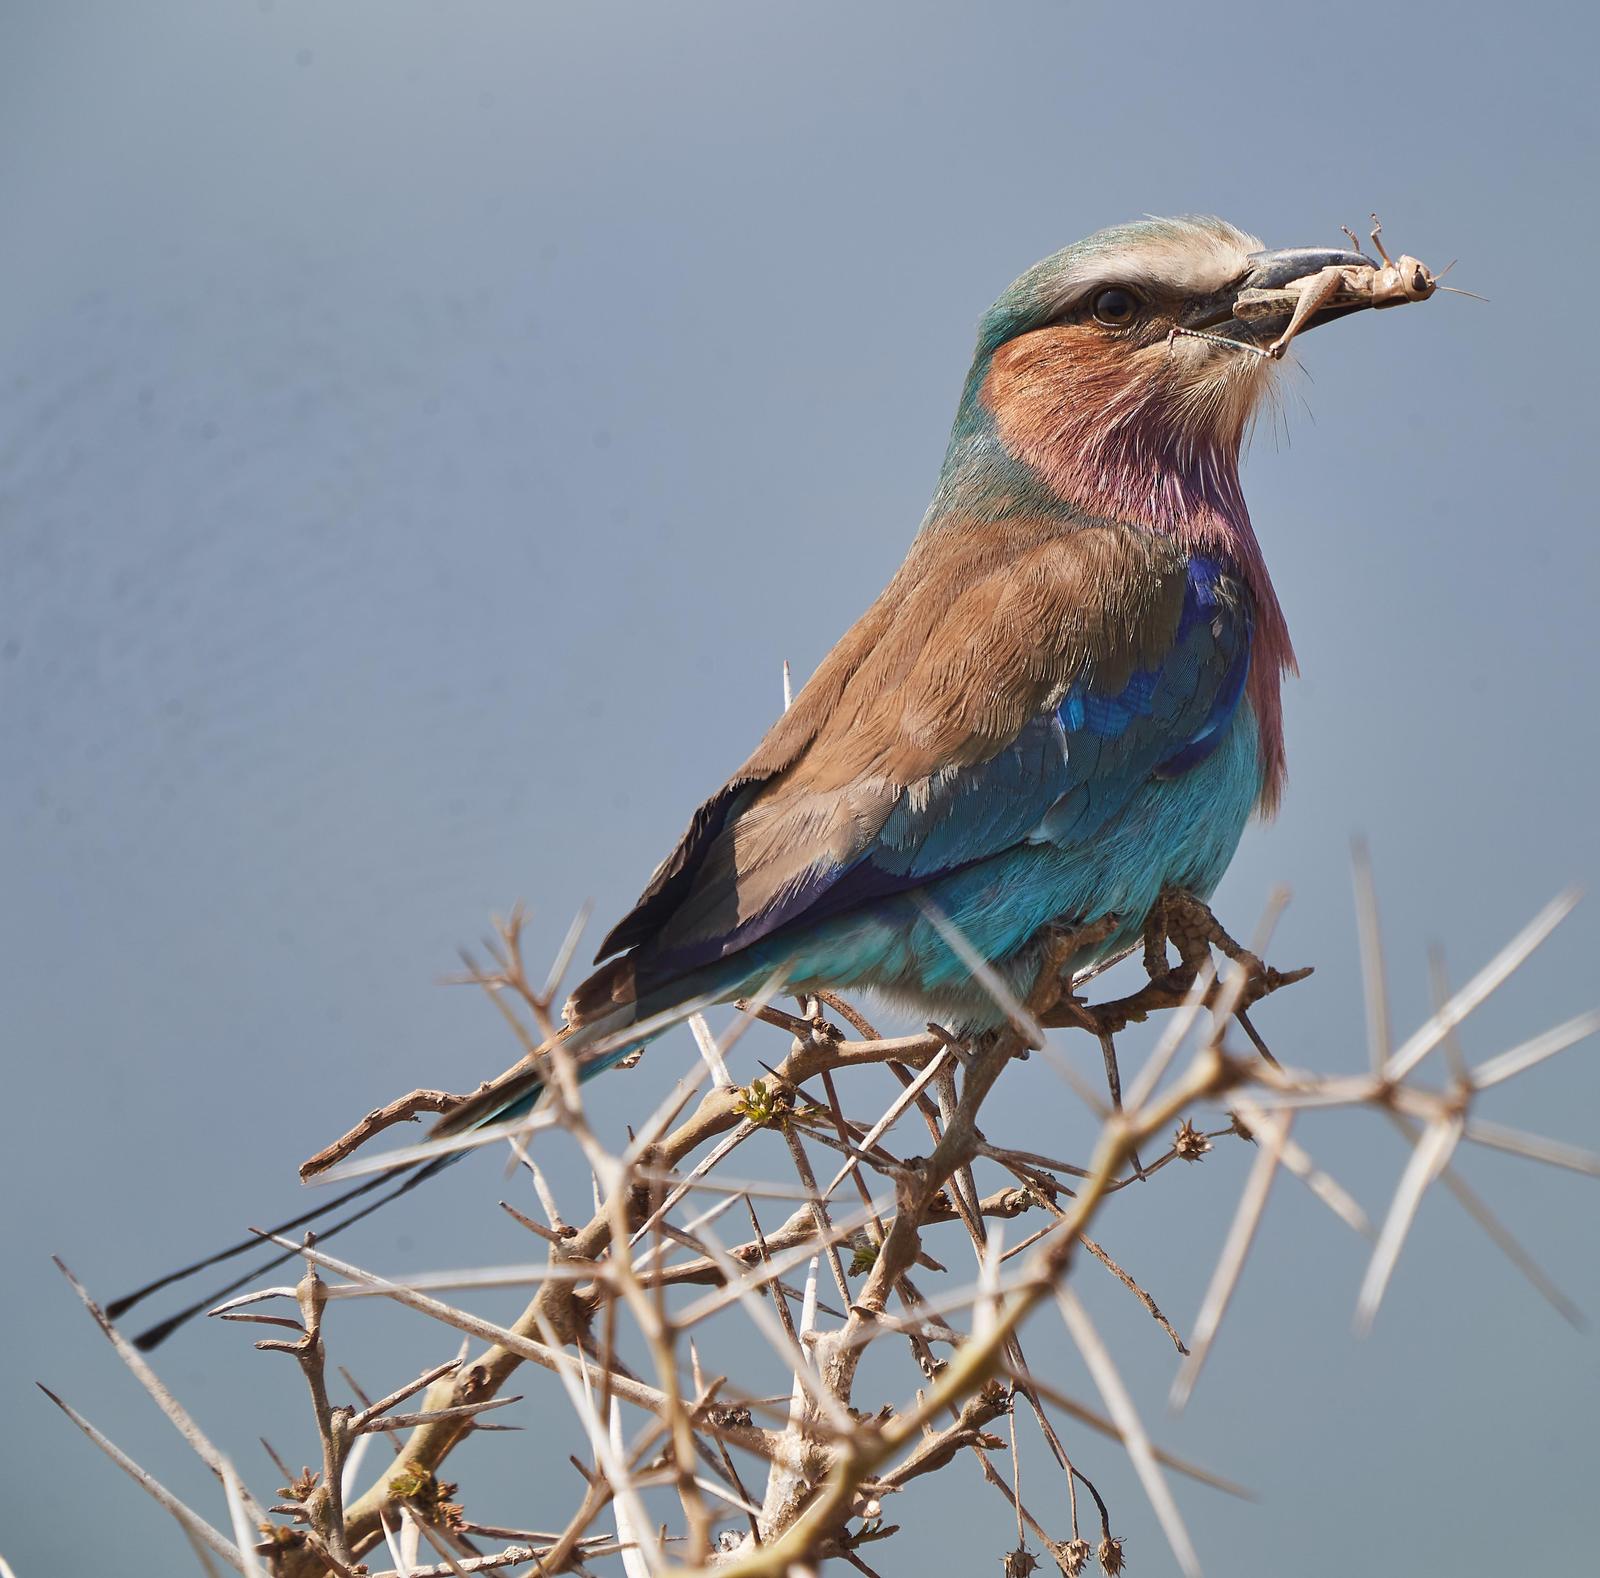 Lilac-breasted Roller Photo by Steven Cheong